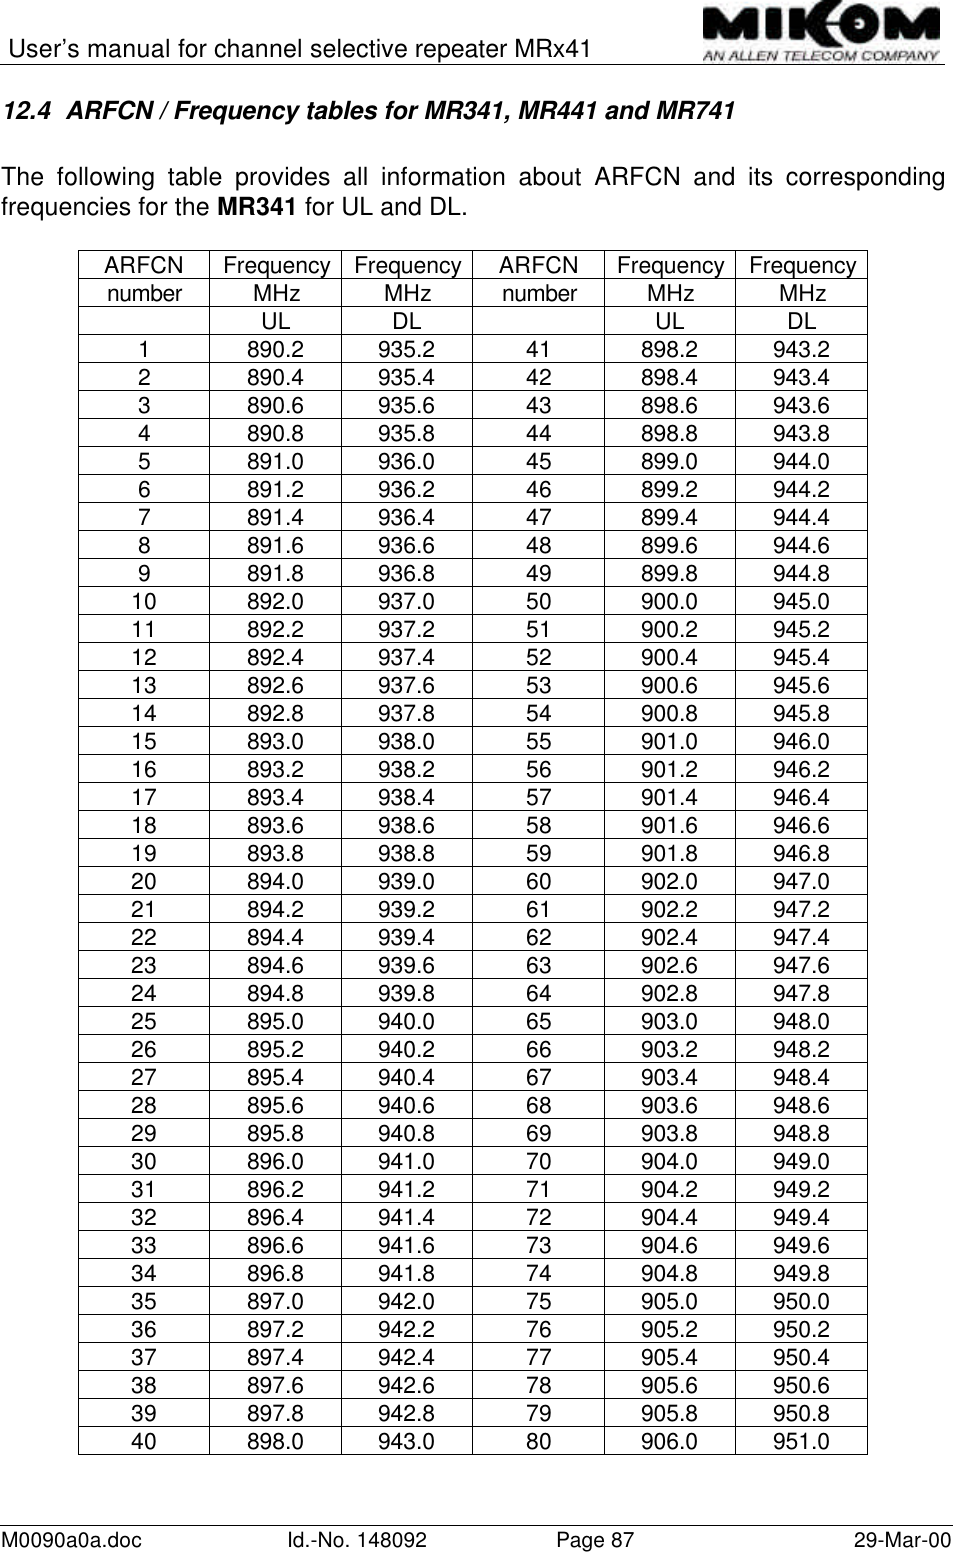 User’s manual for channel selective repeater MRx41M0090a0a.doc Id.-No. 148092 Page 87 29-Mar-0012.4 ARFCN / Frequency tables for MR341, MR441 and MR741The following table provides all information about ARFCN and its correspondingfrequencies for the MR341 for UL and DL.ARFCN Frequency Frequency ARFCN Frequency Frequencynumber MHz MHz number MHz MHzUL DL UL DL1890.2 935.2 41 898.2 943.22890.4 935.4 42 898.4 943.43890.6 935.6 43 898.6 943.64890.8 935.8 44 898.8 943.85891.0 936.0 45 899.0 944.06891.2 936.2 46 899.2 944.27891.4 936.4 47 899.4 944.48891.6 936.6 48 899.6 944.69891.8 936.8 49 899.8 944.810 892.0 937.0 50 900.0 945.011 892.2 937.2 51 900.2 945.212 892.4 937.4 52 900.4 945.413 892.6 937.6 53 900.6 945.614 892.8 937.8 54 900.8 945.815 893.0 938.0 55 901.0 946.016 893.2 938.2 56 901.2 946.217 893.4 938.4 57 901.4 946.418 893.6 938.6 58 901.6 946.619 893.8 938.8 59 901.8 946.820 894.0 939.0 60 902.0 947.021 894.2 939.2 61 902.2 947.222 894.4 939.4 62 902.4 947.423 894.6 939.6 63 902.6 947.624 894.8 939.8 64 902.8 947.825 895.0 940.0 65 903.0 948.026 895.2 940.2 66 903.2 948.227 895.4 940.4 67 903.4 948.428 895.6 940.6 68 903.6 948.629 895.8 940.8 69 903.8 948.830 896.0 941.0 70 904.0 949.031 896.2 941.2 71 904.2 949.232 896.4 941.4 72 904.4 949.433 896.6 941.6 73 904.6 949.634 896.8 941.8 74 904.8 949.835 897.0 942.0 75 905.0 950.036 897.2 942.2 76 905.2 950.237 897.4 942.4 77 905.4 950.438 897.6 942.6 78 905.6 950.639 897.8 942.8 79 905.8 950.840 898.0 943.0 80 906.0 951.0